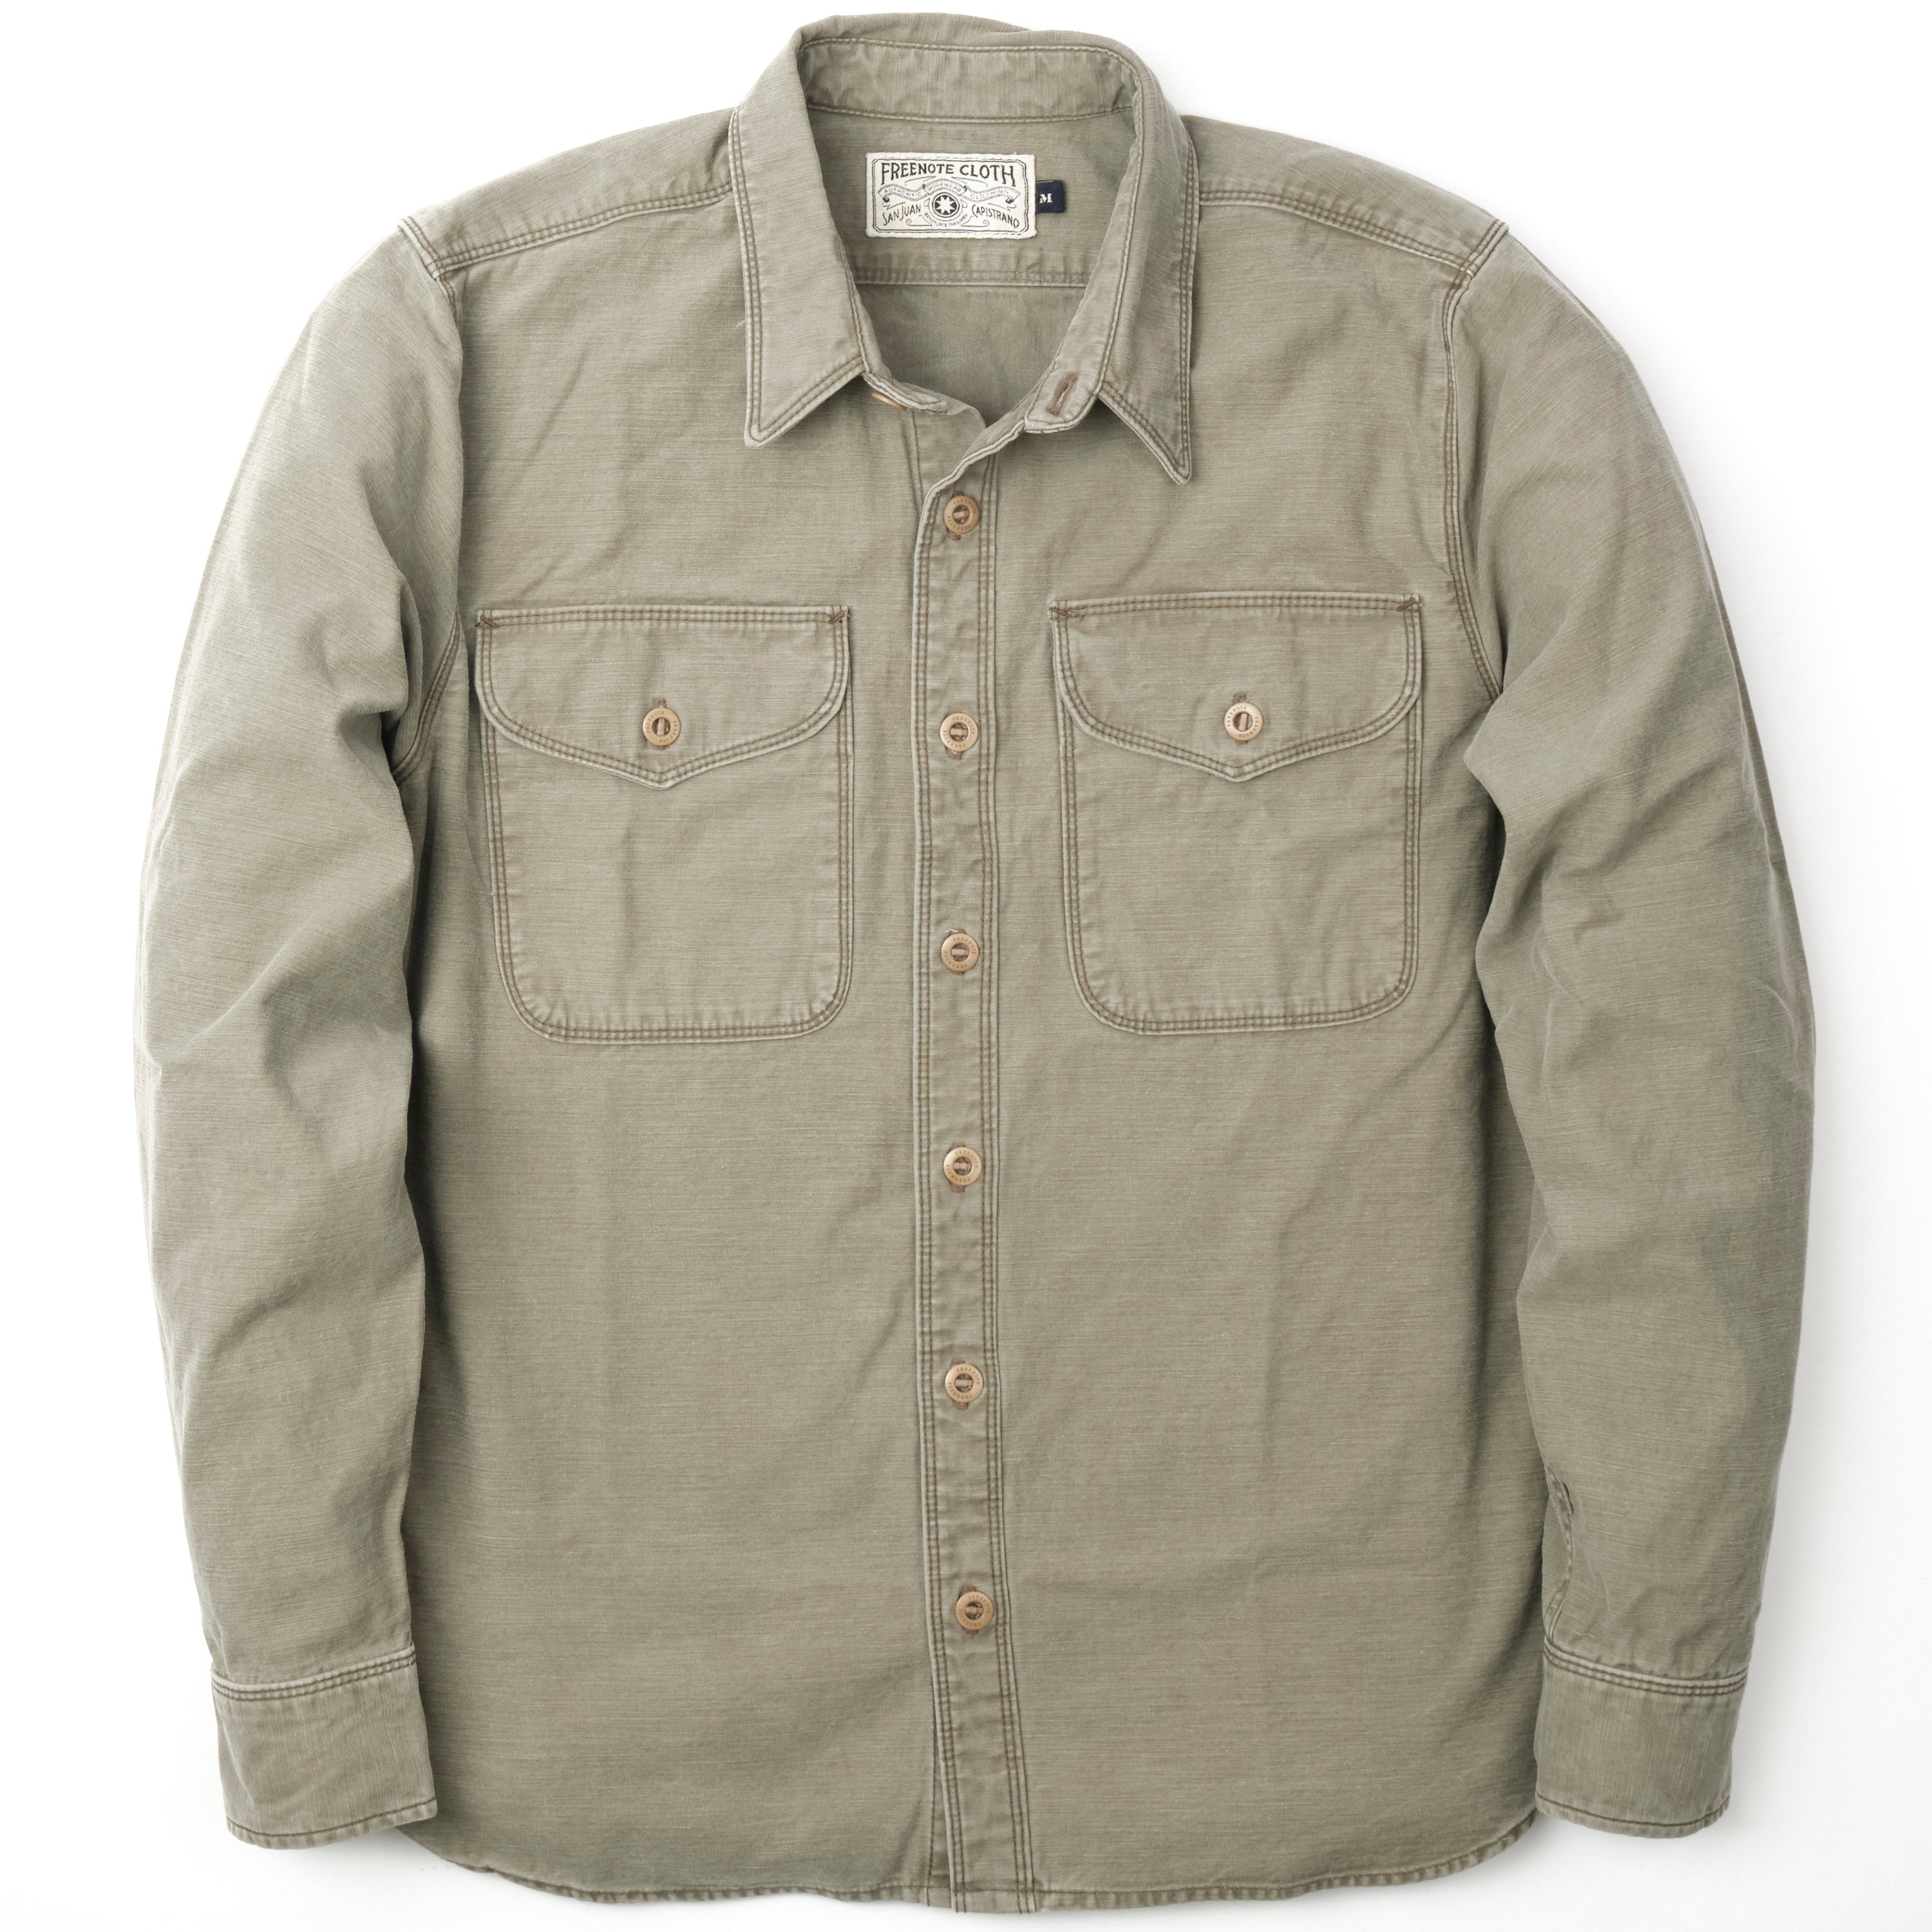 Lightweight Utility Shirt in Olive